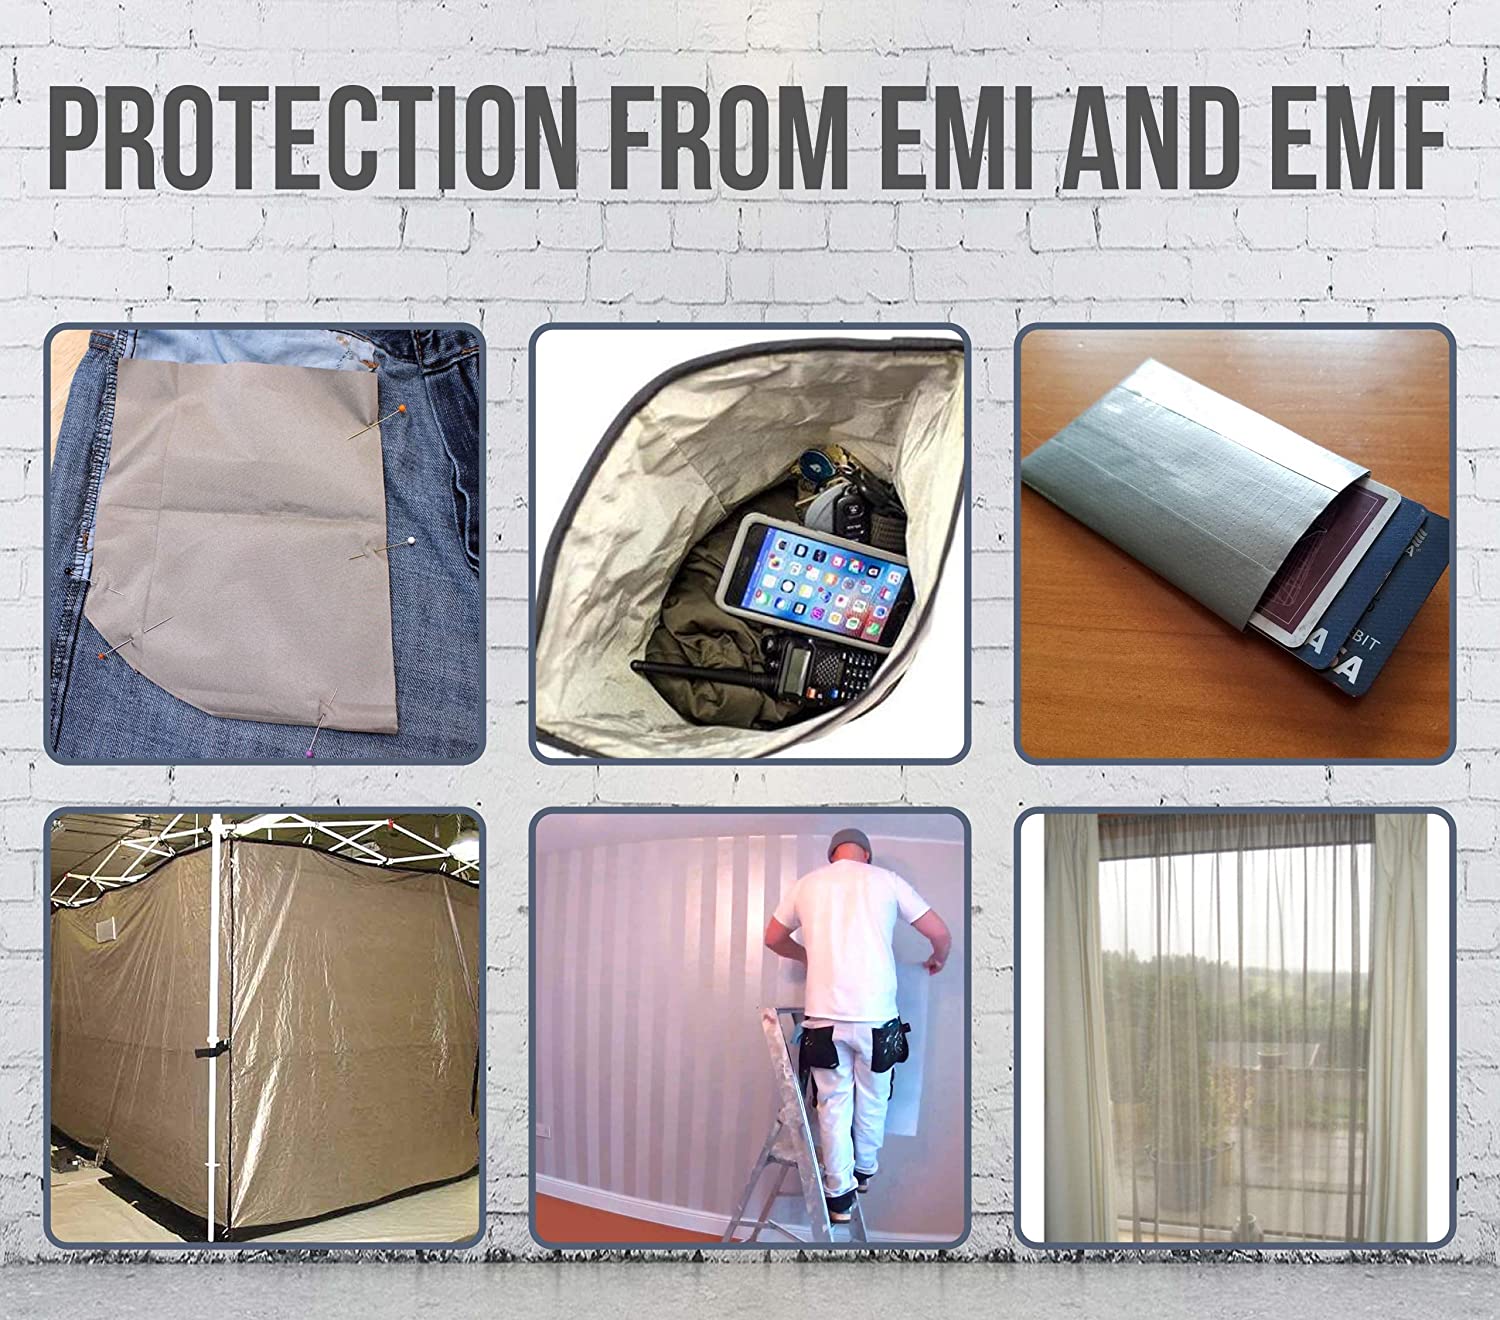 THE BEST FARADAY FABRIC TO PROTECT YOUR DEVICES, Build a DIY Faraday Cage,  Shield EMPs, RFs, & More 